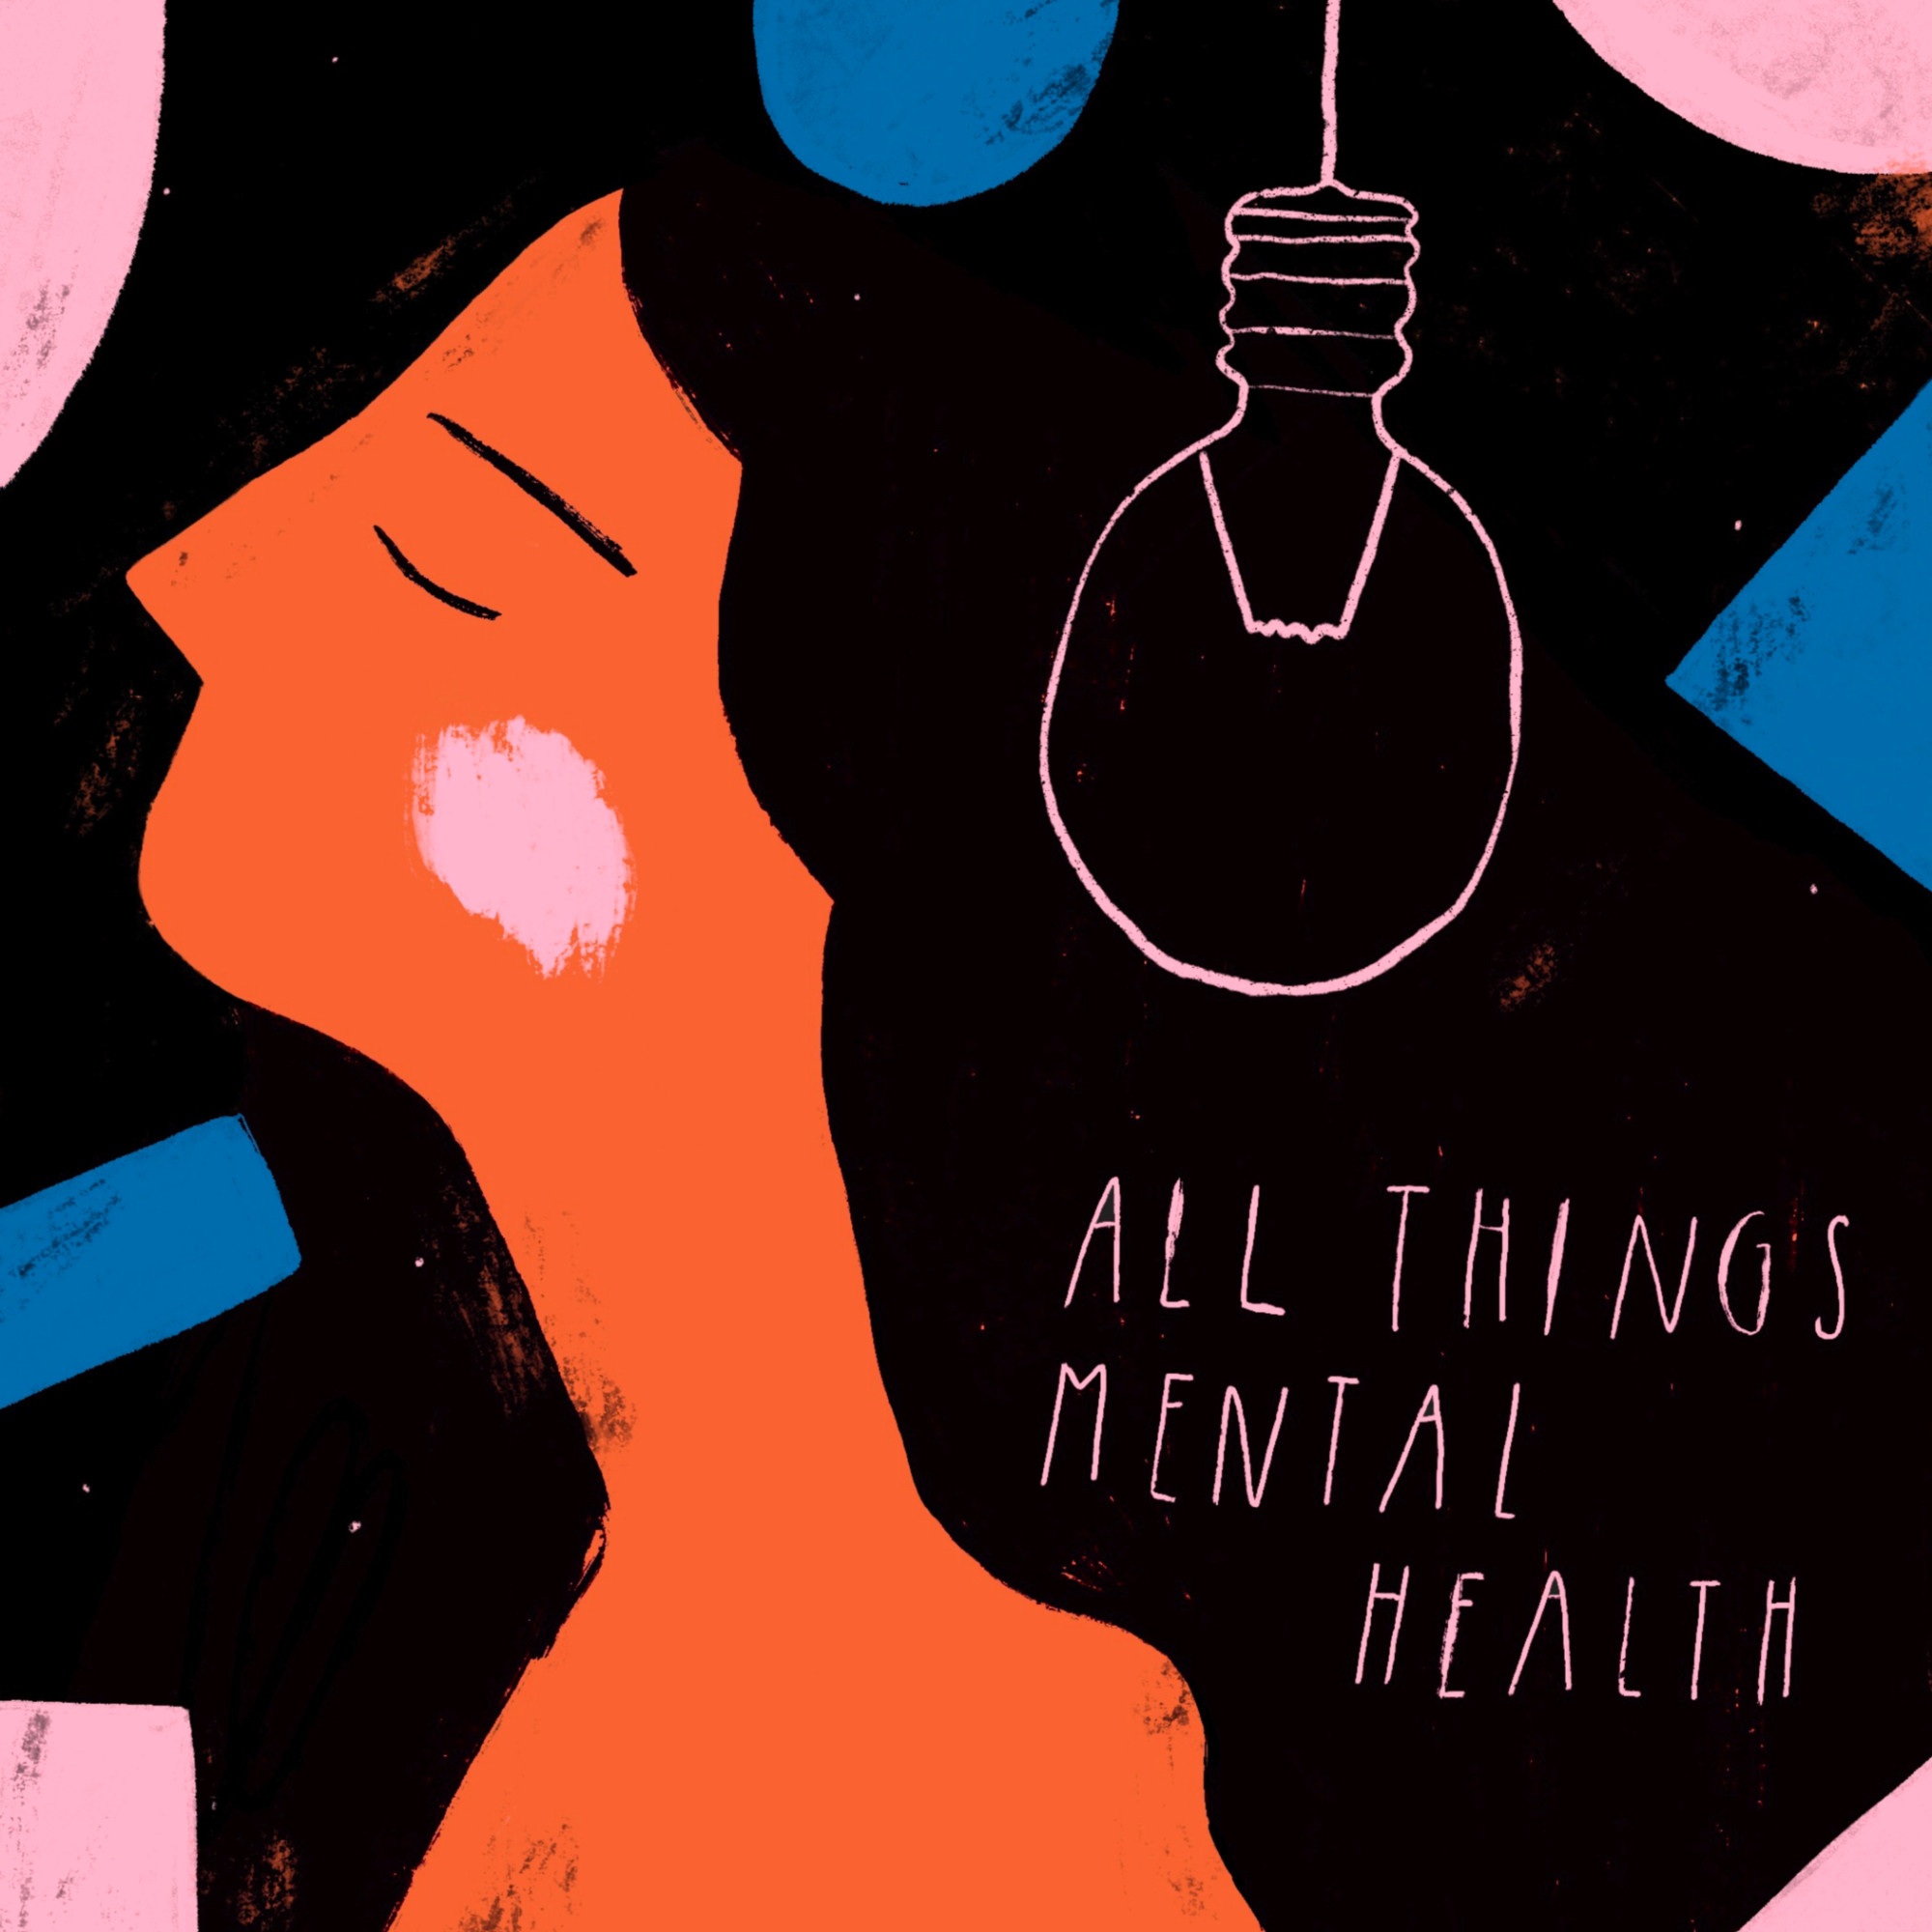 Podcast cover for series "All Things Mental Health", a student-run project originating at York University, discussing a broad range of mental health experiences. Lizzie also illustrated, and animated, the 9 individual podcast covers as shown on Spotify and across social media (@allthings.mentalhealth). Lizzie Knott.